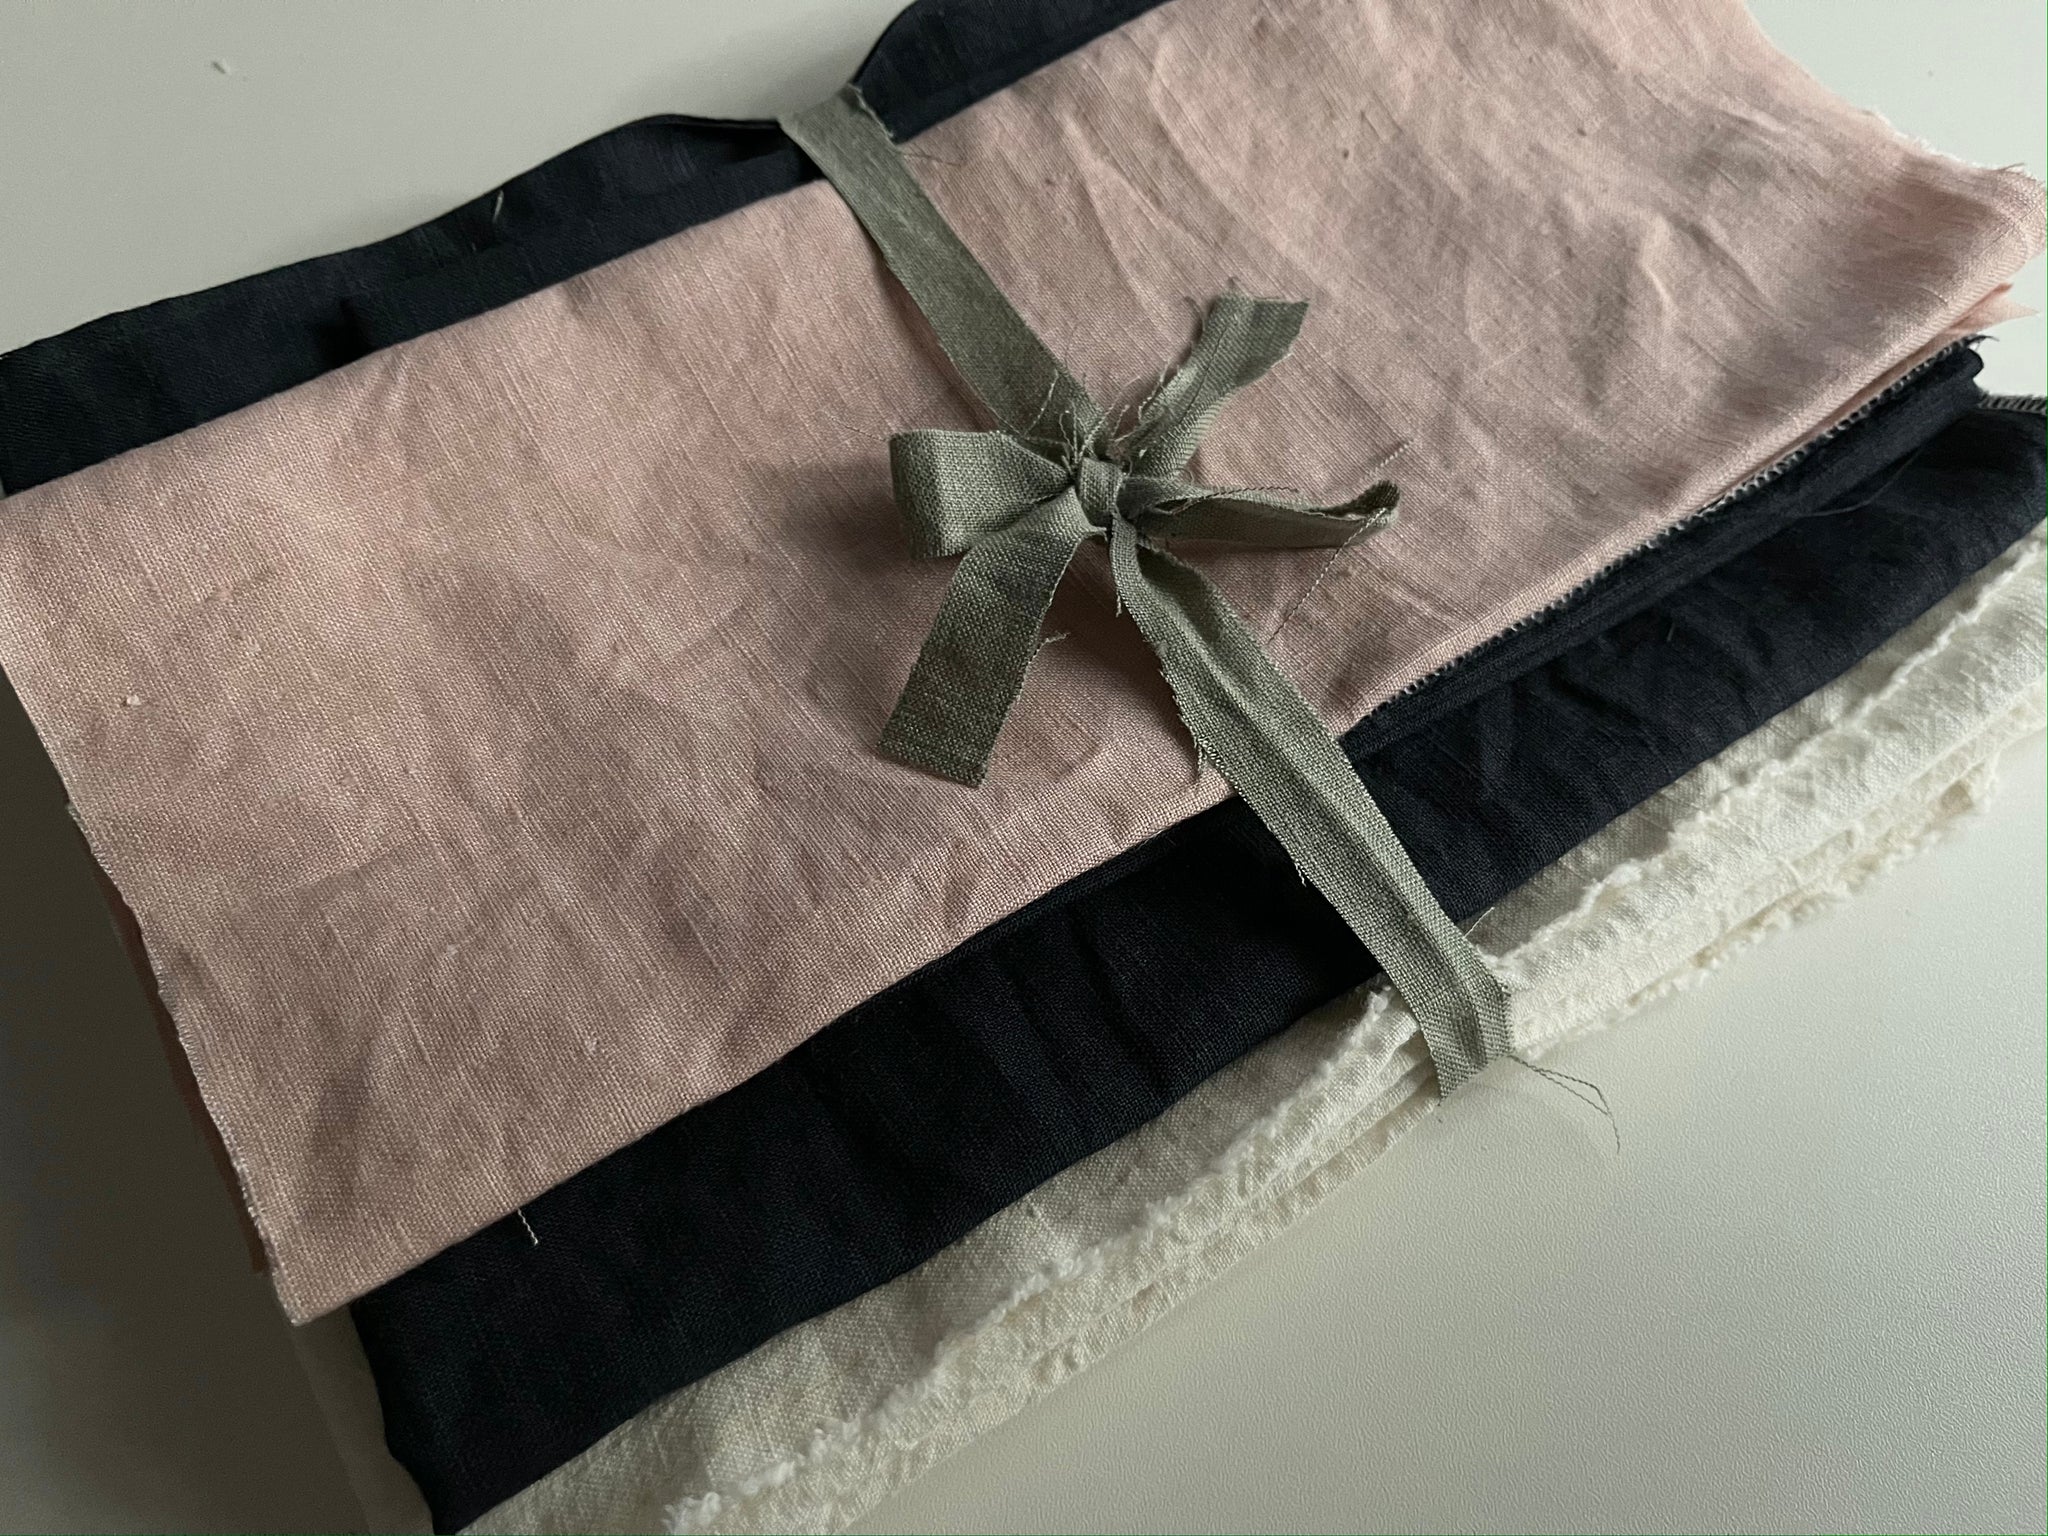 Linen Fabric Remnants - Ivory, Navy Blue, Dusty Rose